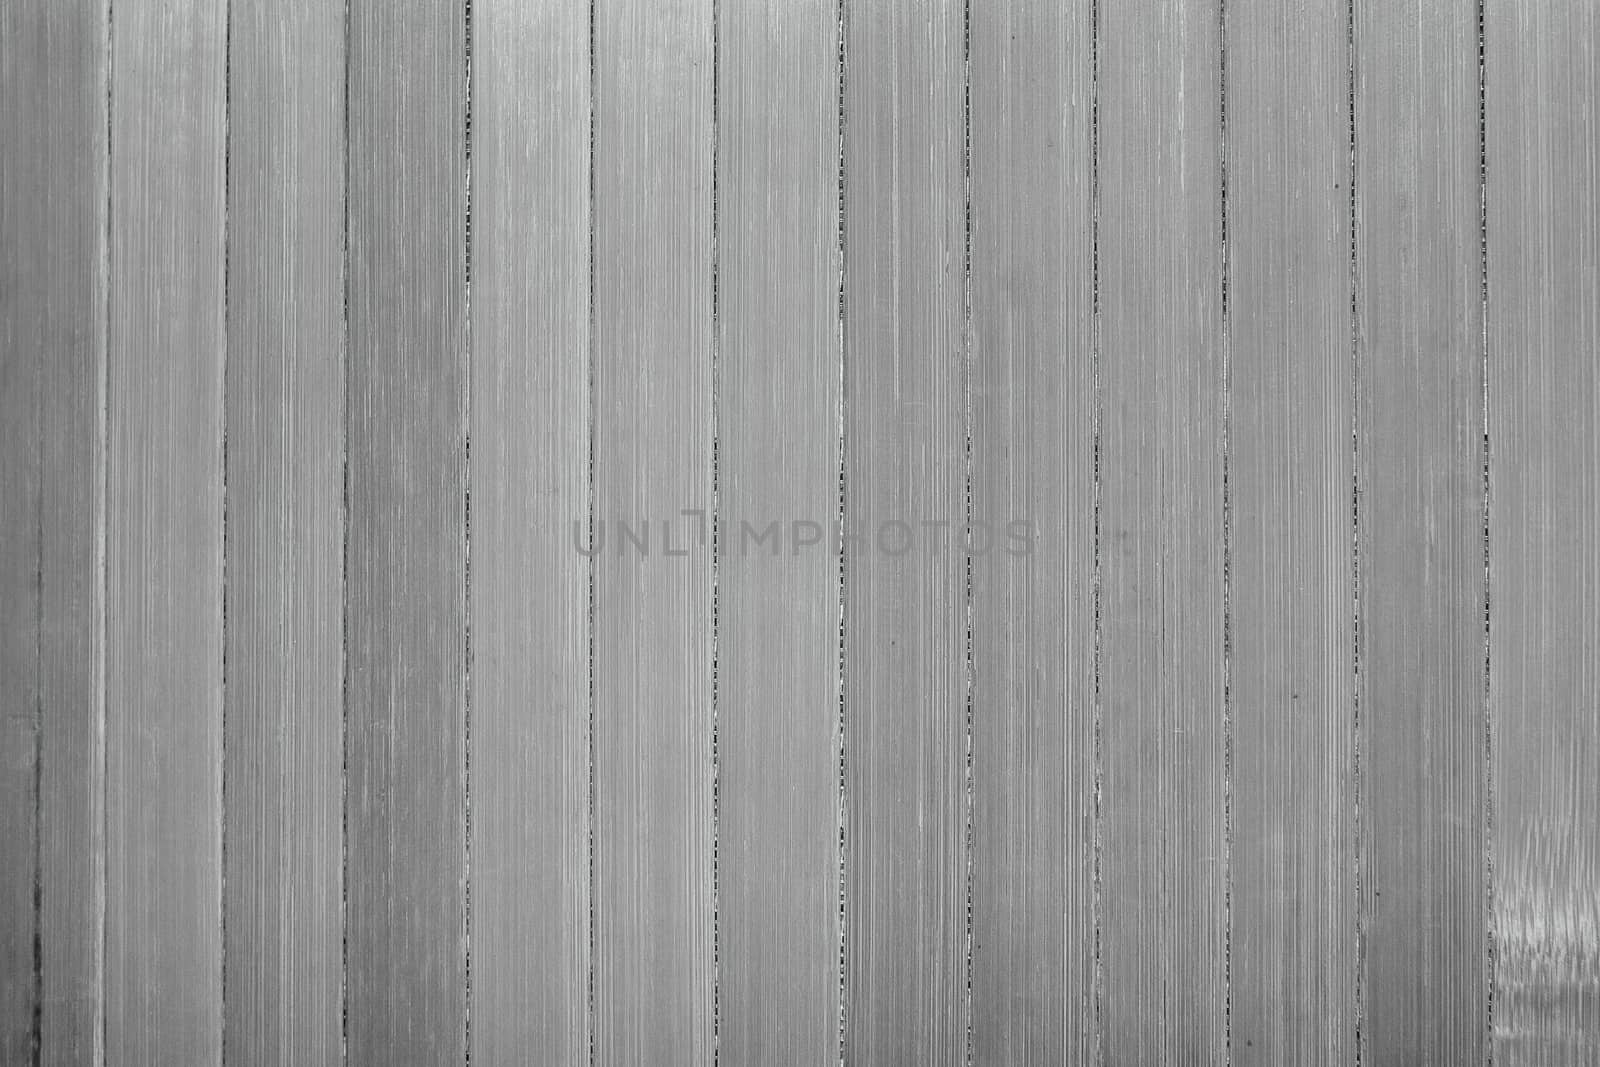 Dry reeds texture. Organic nature wallpaper of grey cane. Natural warm wooden background with bamboo and straw